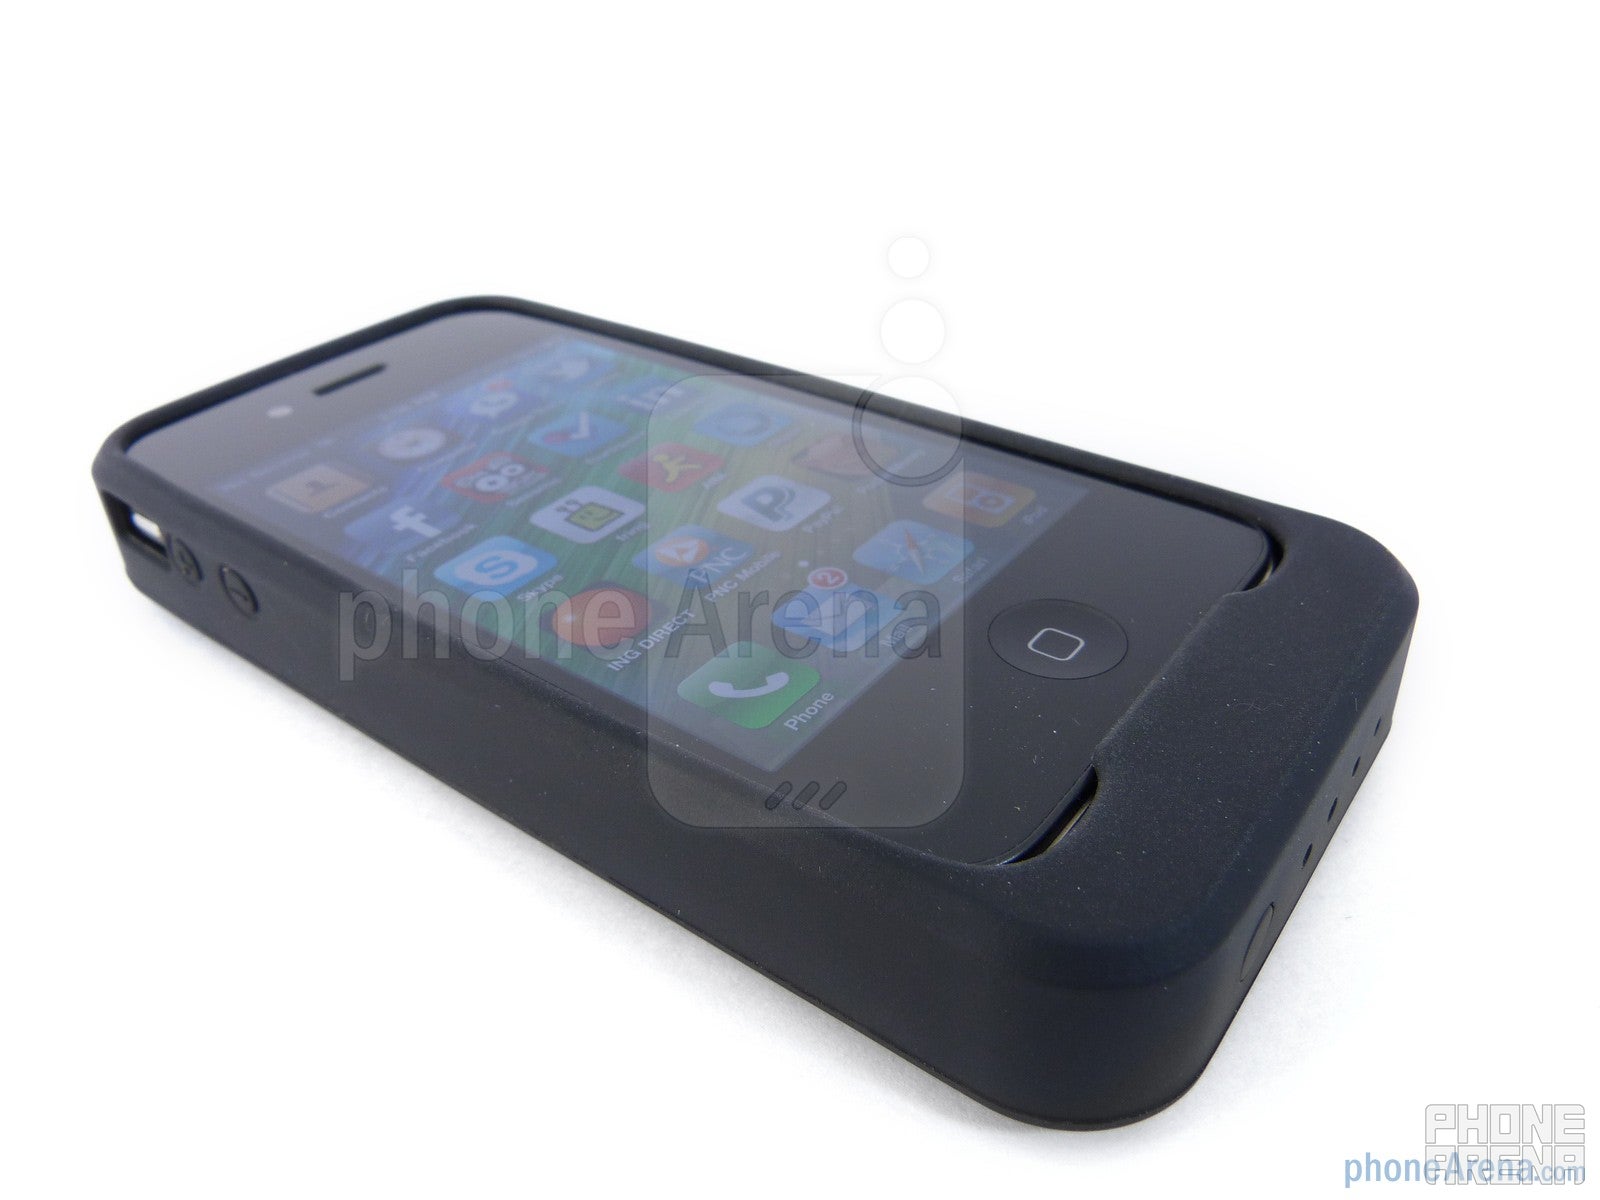 PowerSkin iPhone 4 Case Review